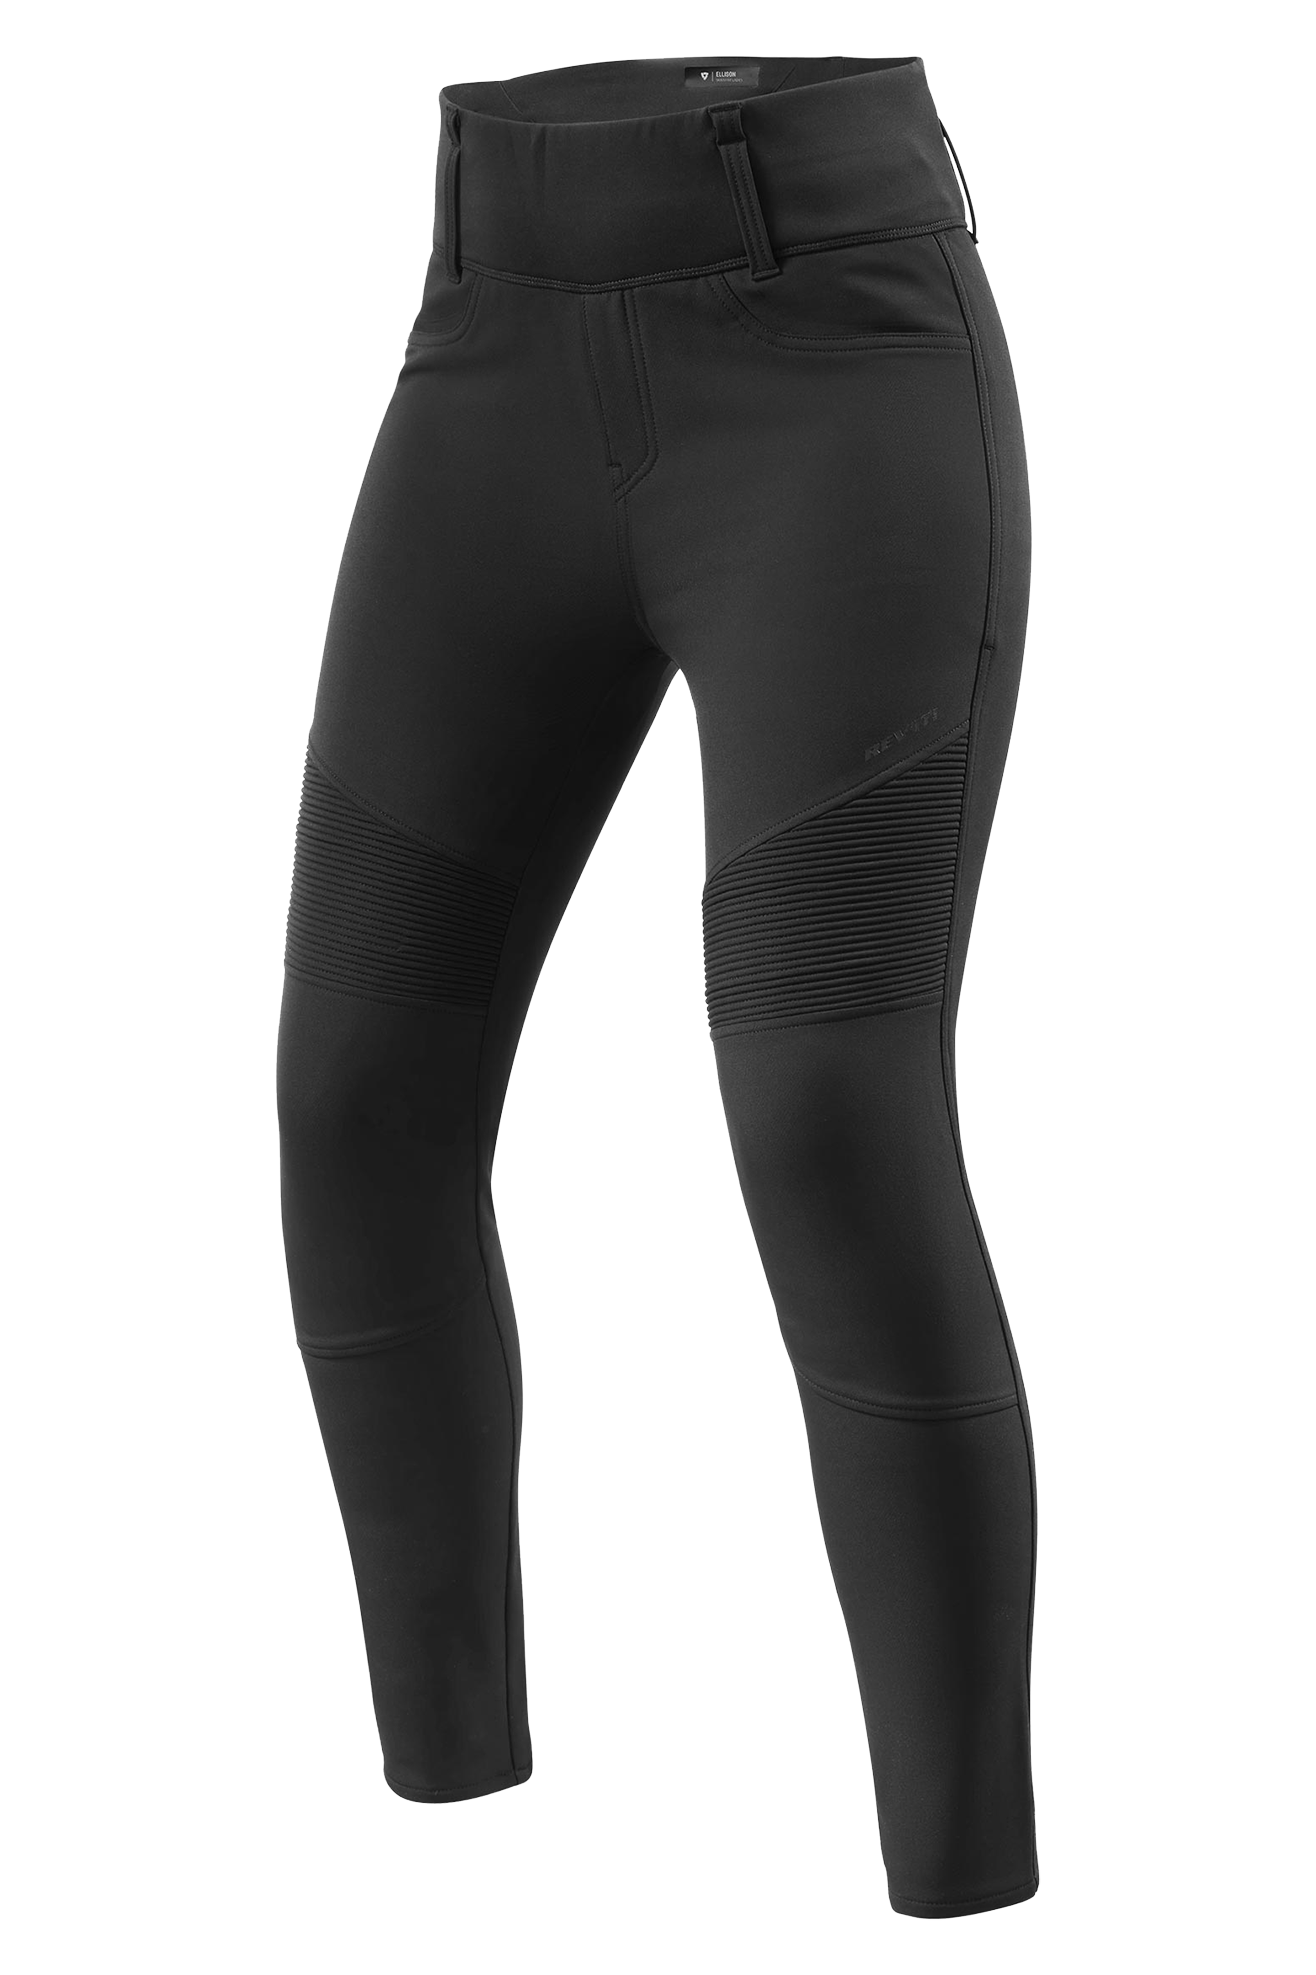 motorcycle pants women motorcycle pants women Suppliers and Manufacturers  at Alibabacom